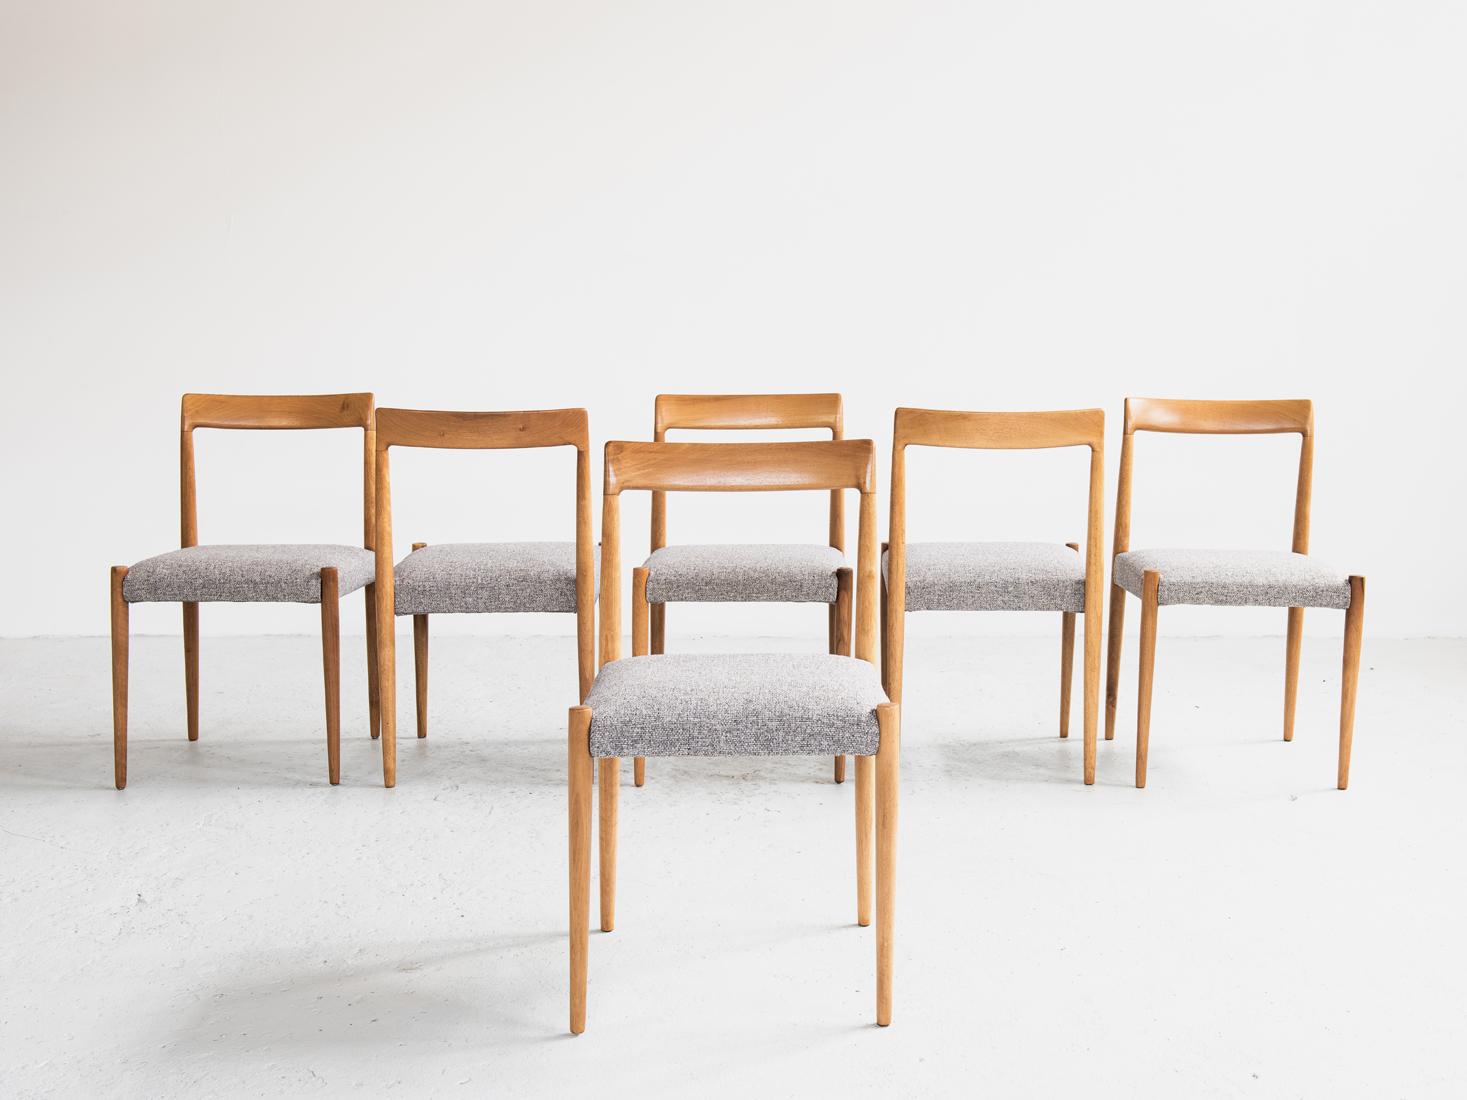 Midcentury set of 6 chairs manufactured by Lübke in Germany in the 1960s. The chairs are made of yellow cherry tree wood . We have reupholstered them in a beautiful grey fabric of good quality. Beautiful veins in the solid wood. Minimalistic design